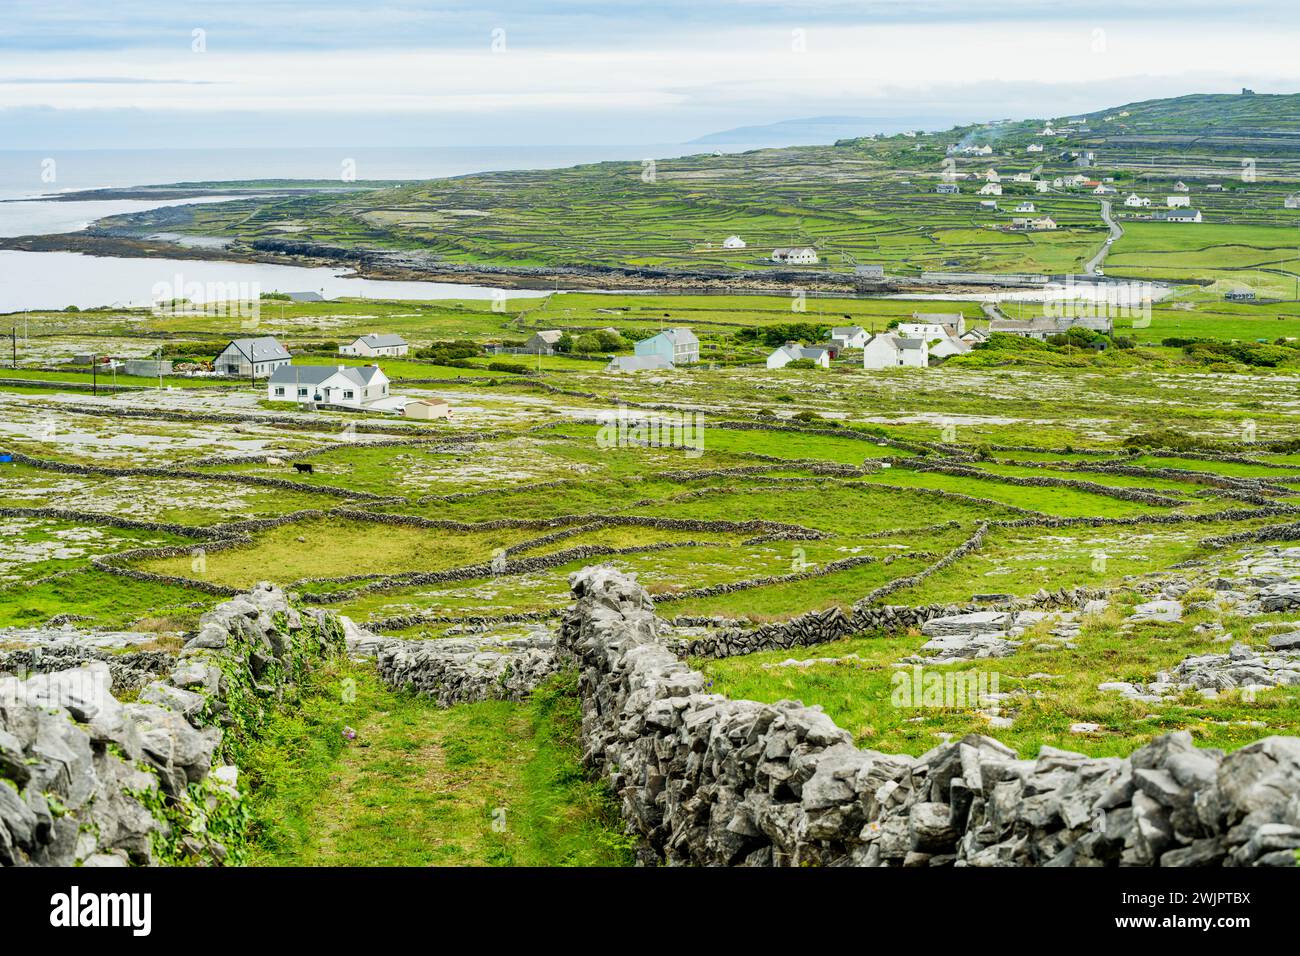 Inishmore or Inis Mor, the largest of the Aran Islands in Galway Bay, Ireland. Famous for its strong Irish culture, loyalty to the Irish language, and Stock Photo